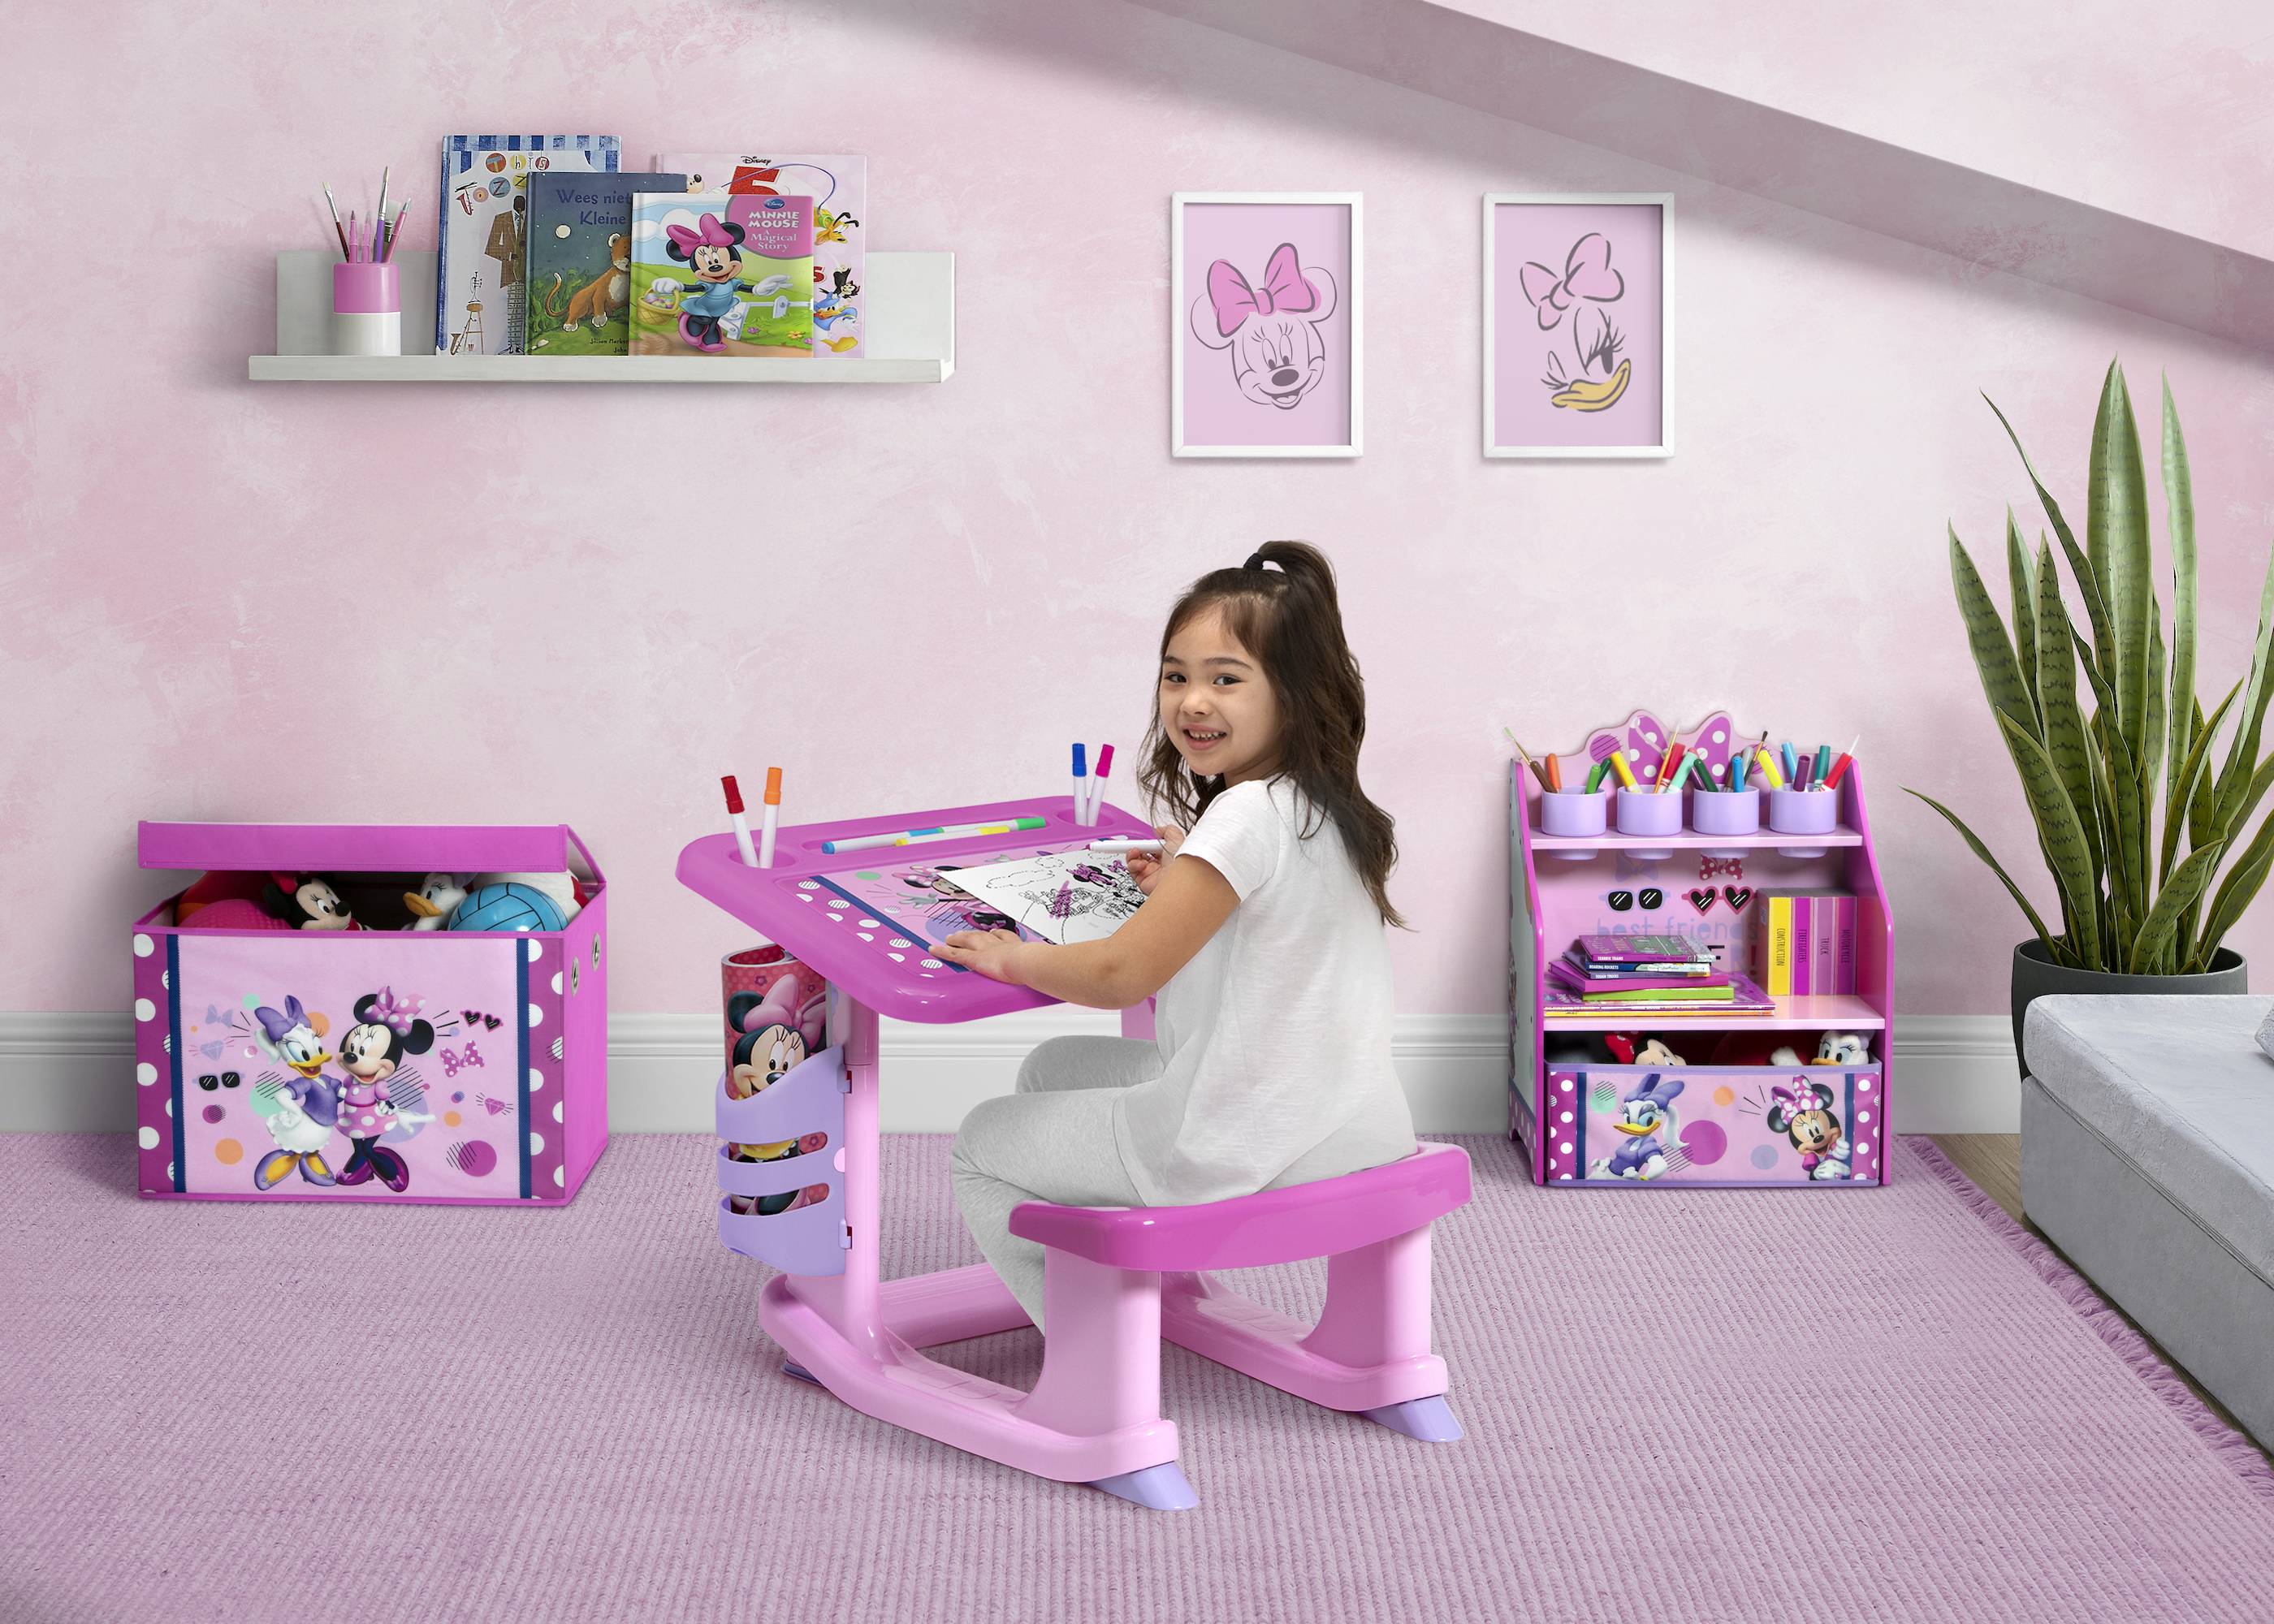 Minnie Mouse 3-Piece Art & Play Toddler Room-in-a-Box by Delta Children – Includes Draw & Play Desk, Art & Storage Station & Fabric Toy Box, Pink - image 3 of 11